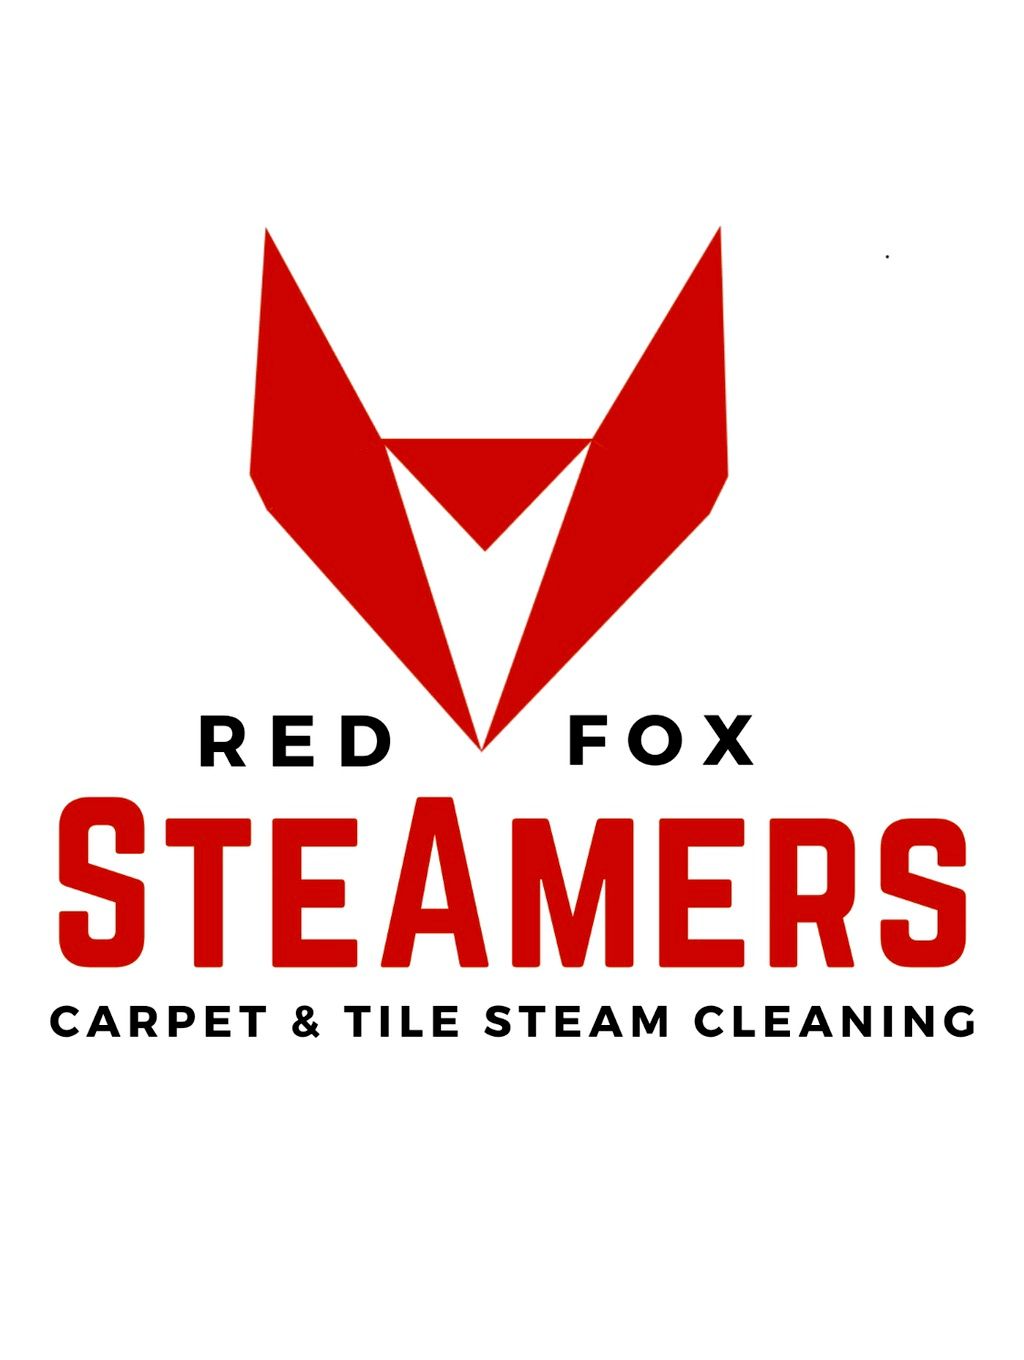 RED FOX STEAMERS